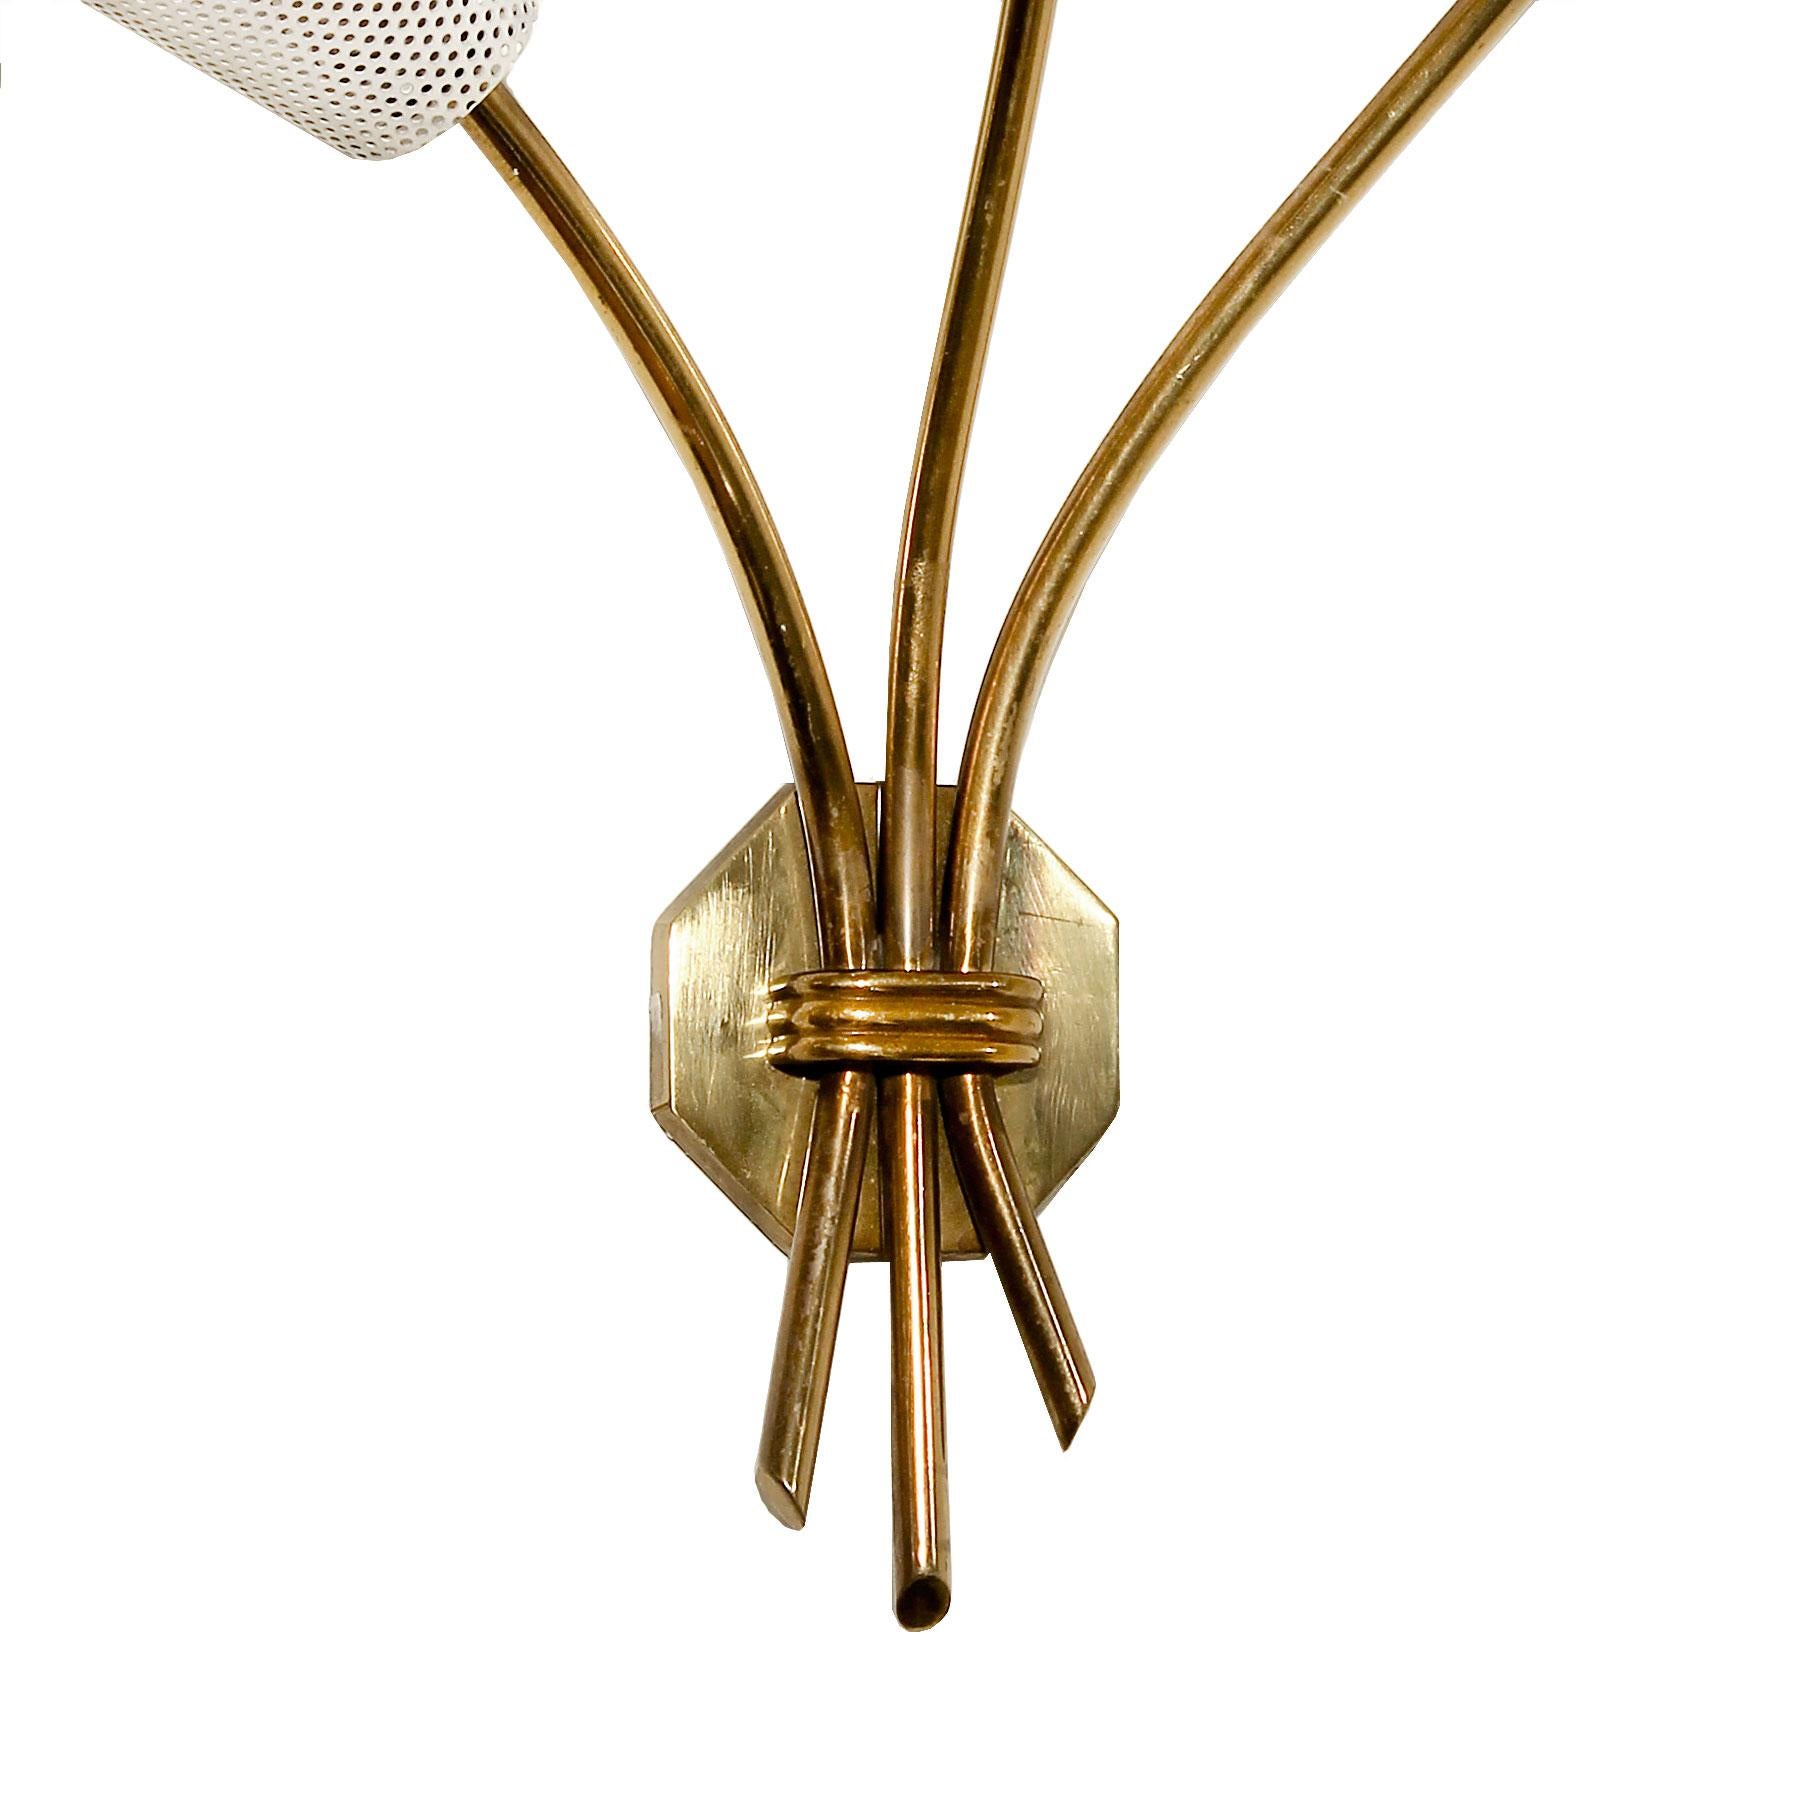 Lacquered Mid-Century Modern Sconce In the Style of Mathieu Matégot - France For Sale